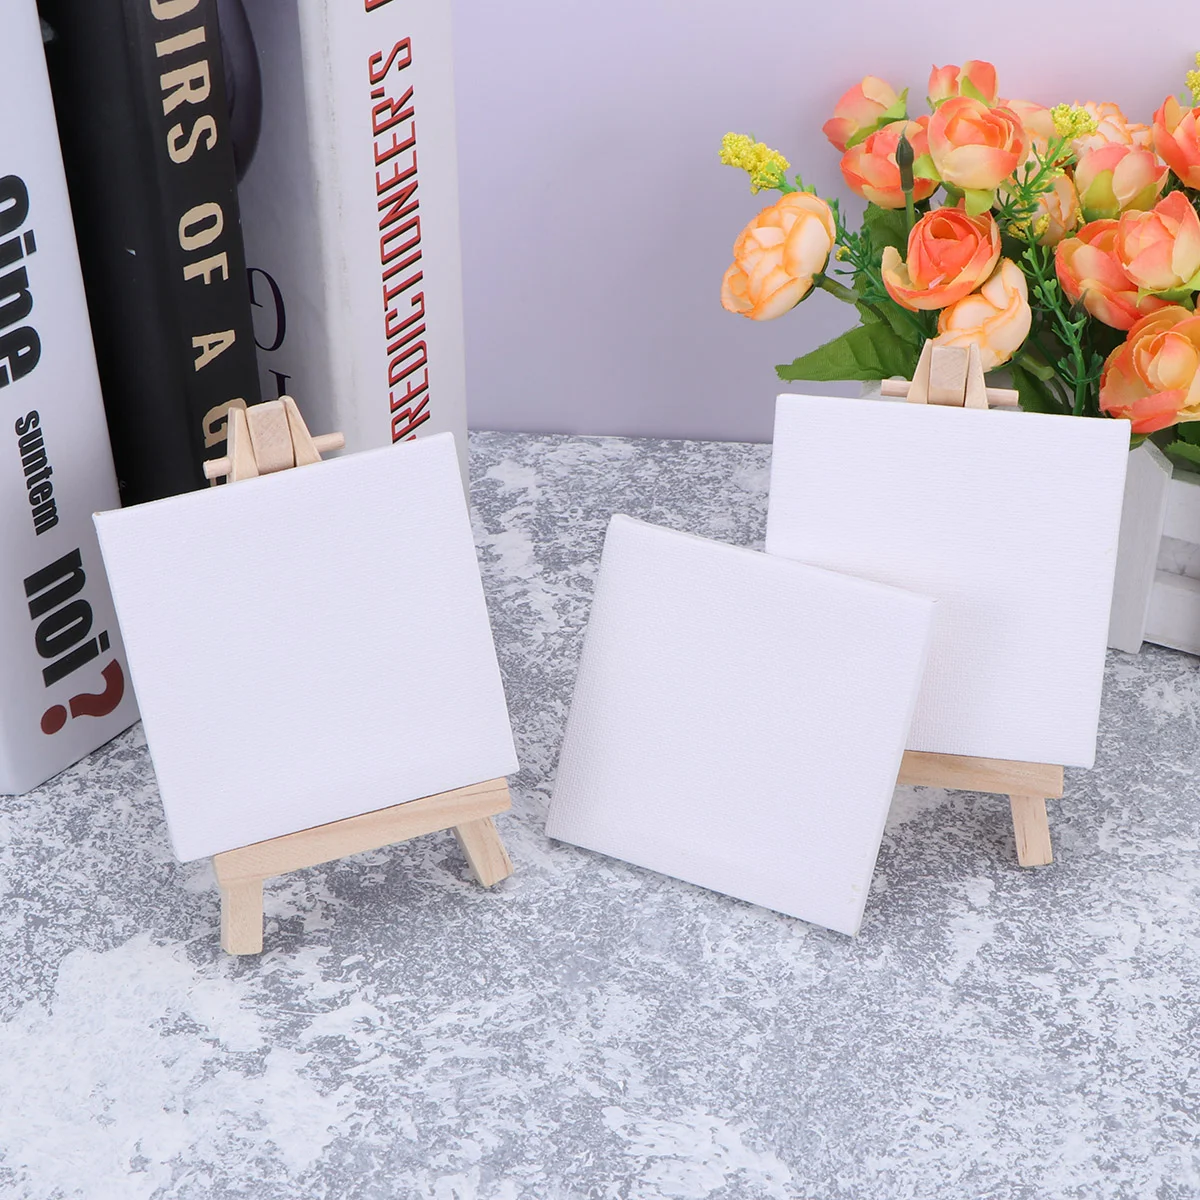 

10PCS Mini Canvas Panel Wooden Easel Sketchpad Settings for Painting Craft Drawing Decoration Gift and Kids'Learning Easels to